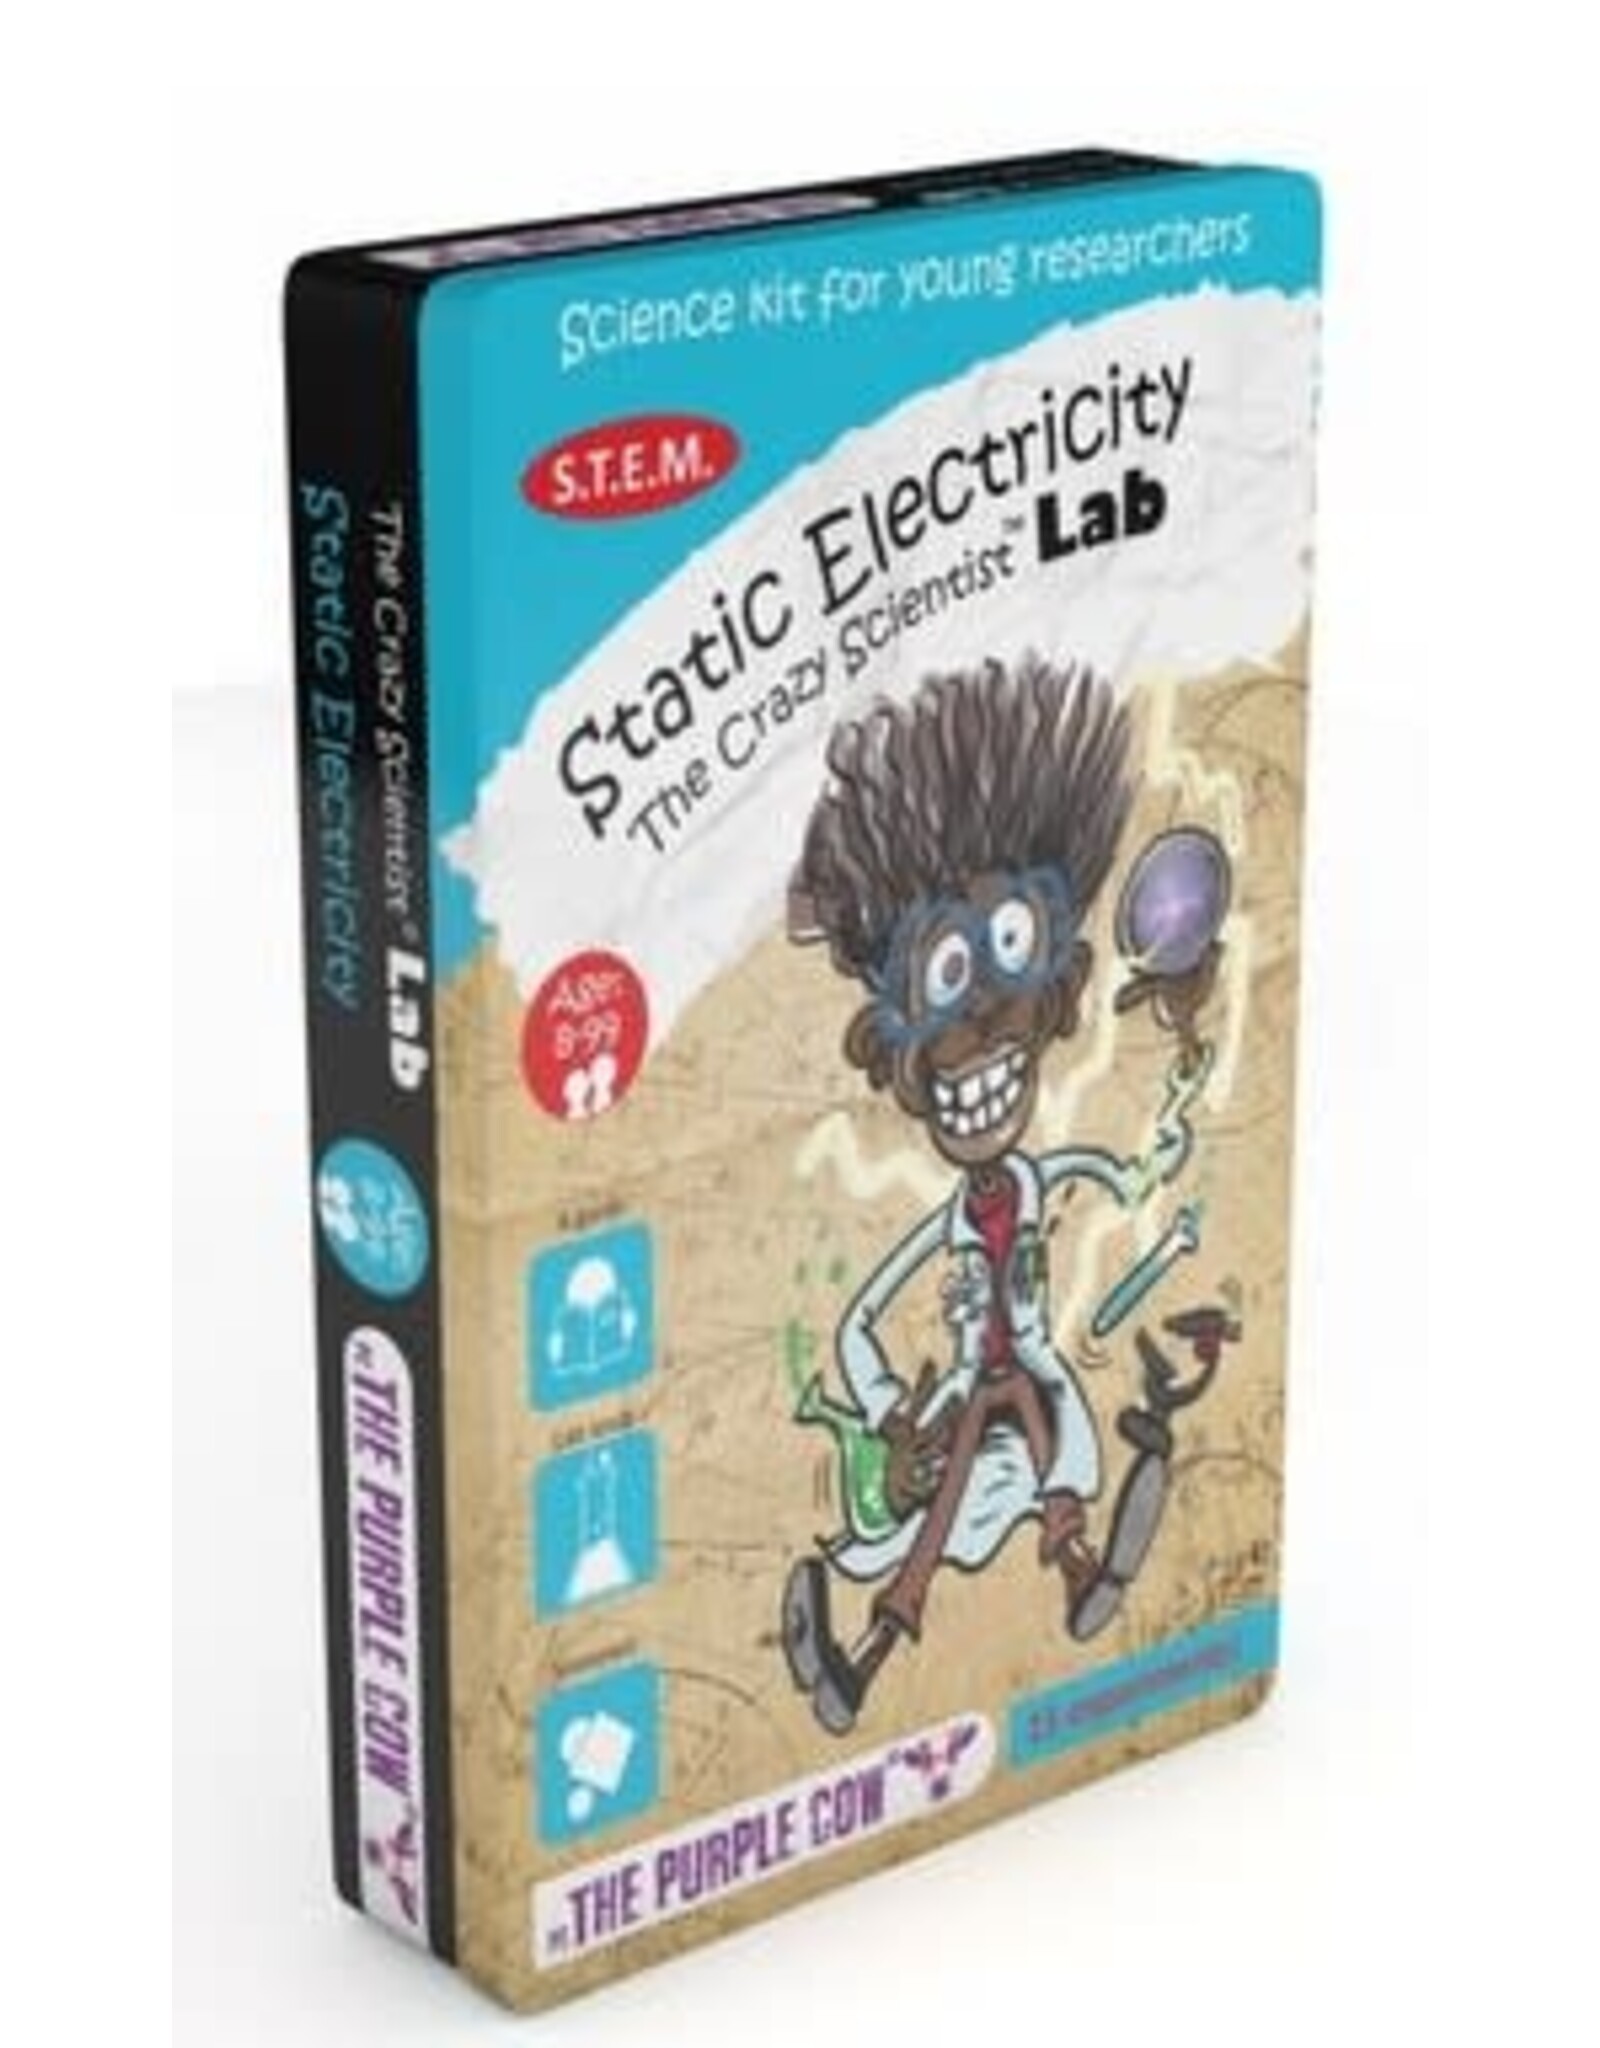 The Purple Cow Static Electricity - Crazy Scientist Lab